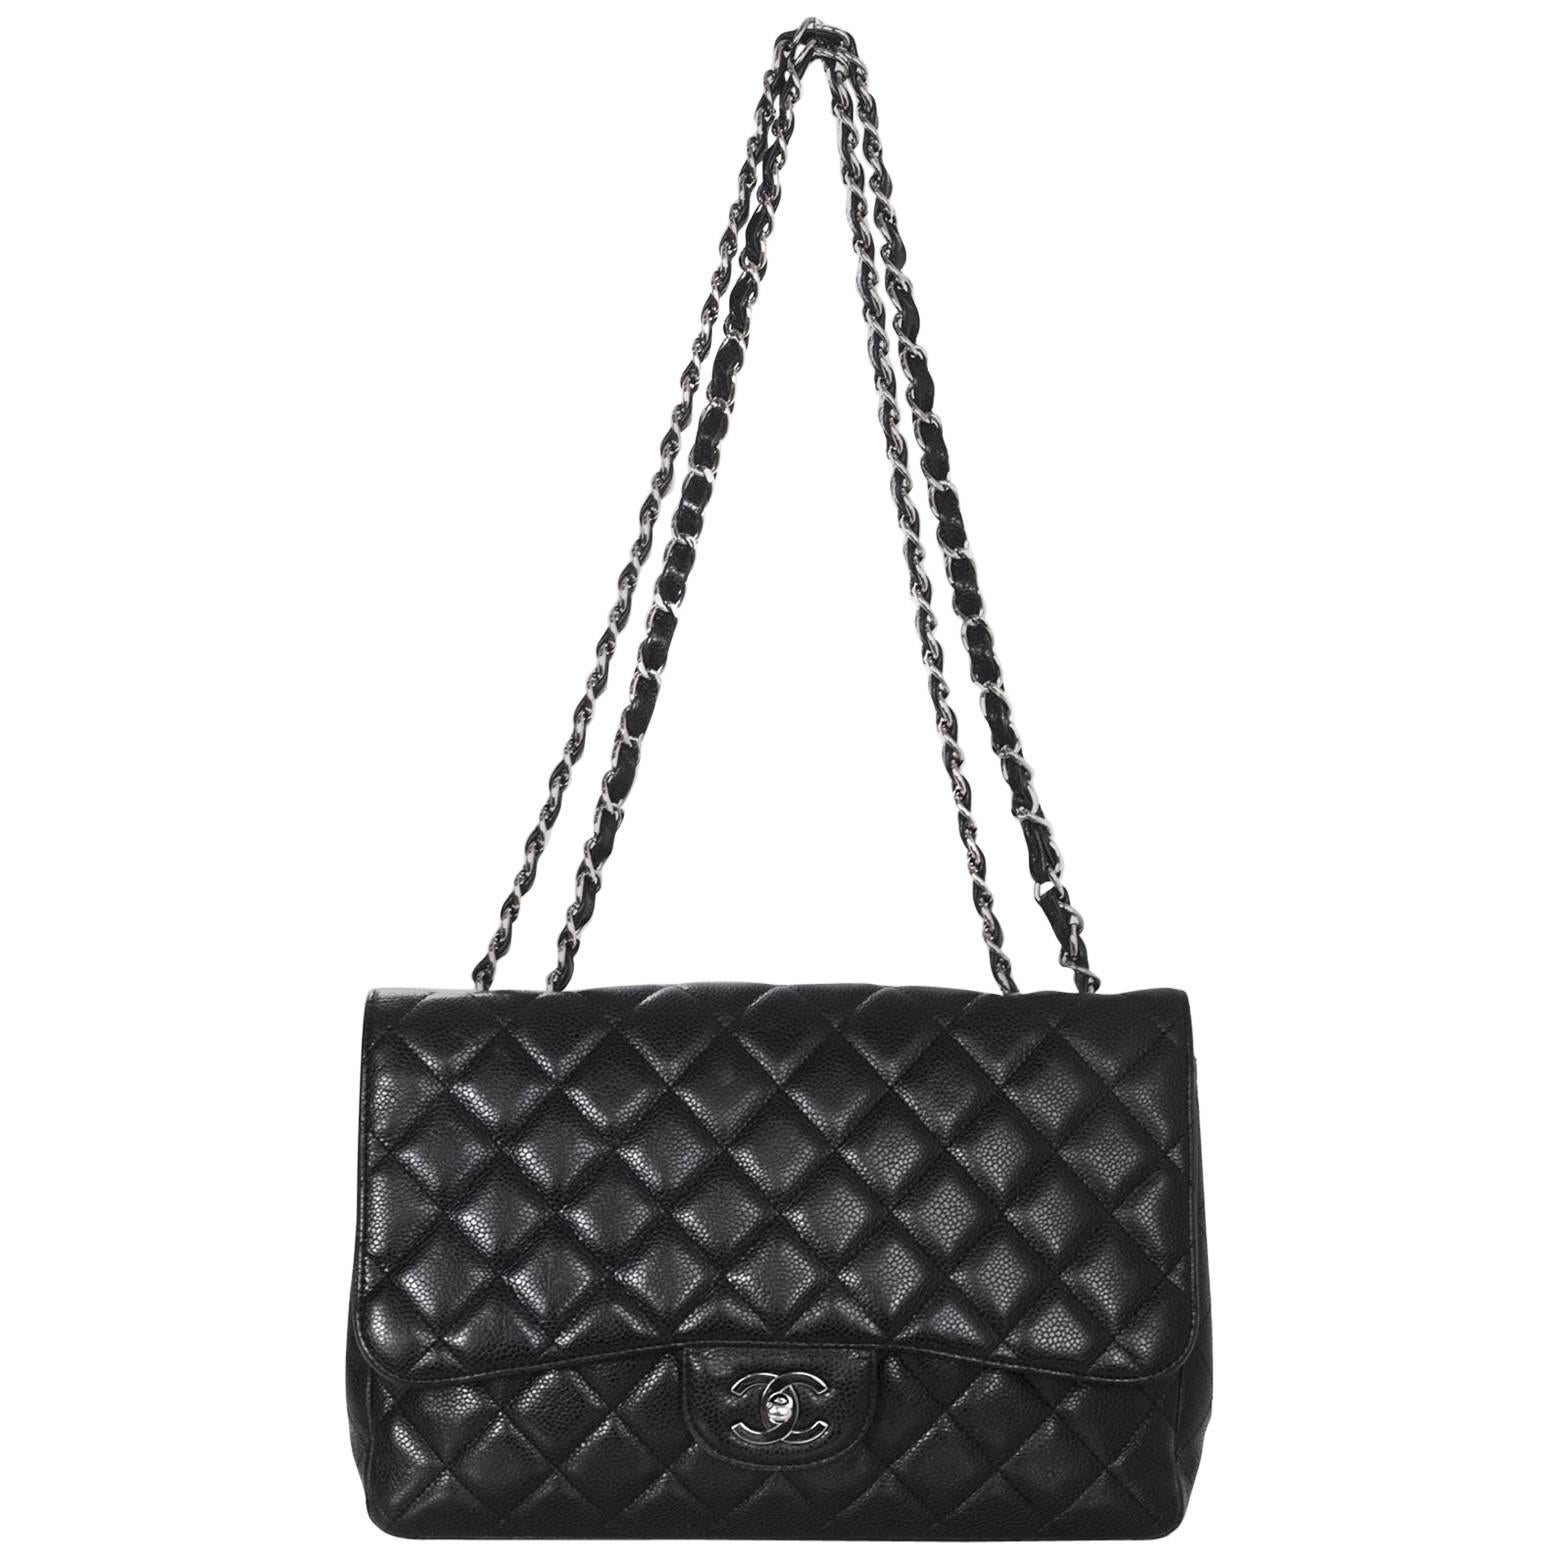 Chanel Black Quilted Caviar Leather Single Flap Jumbo Classic Bag